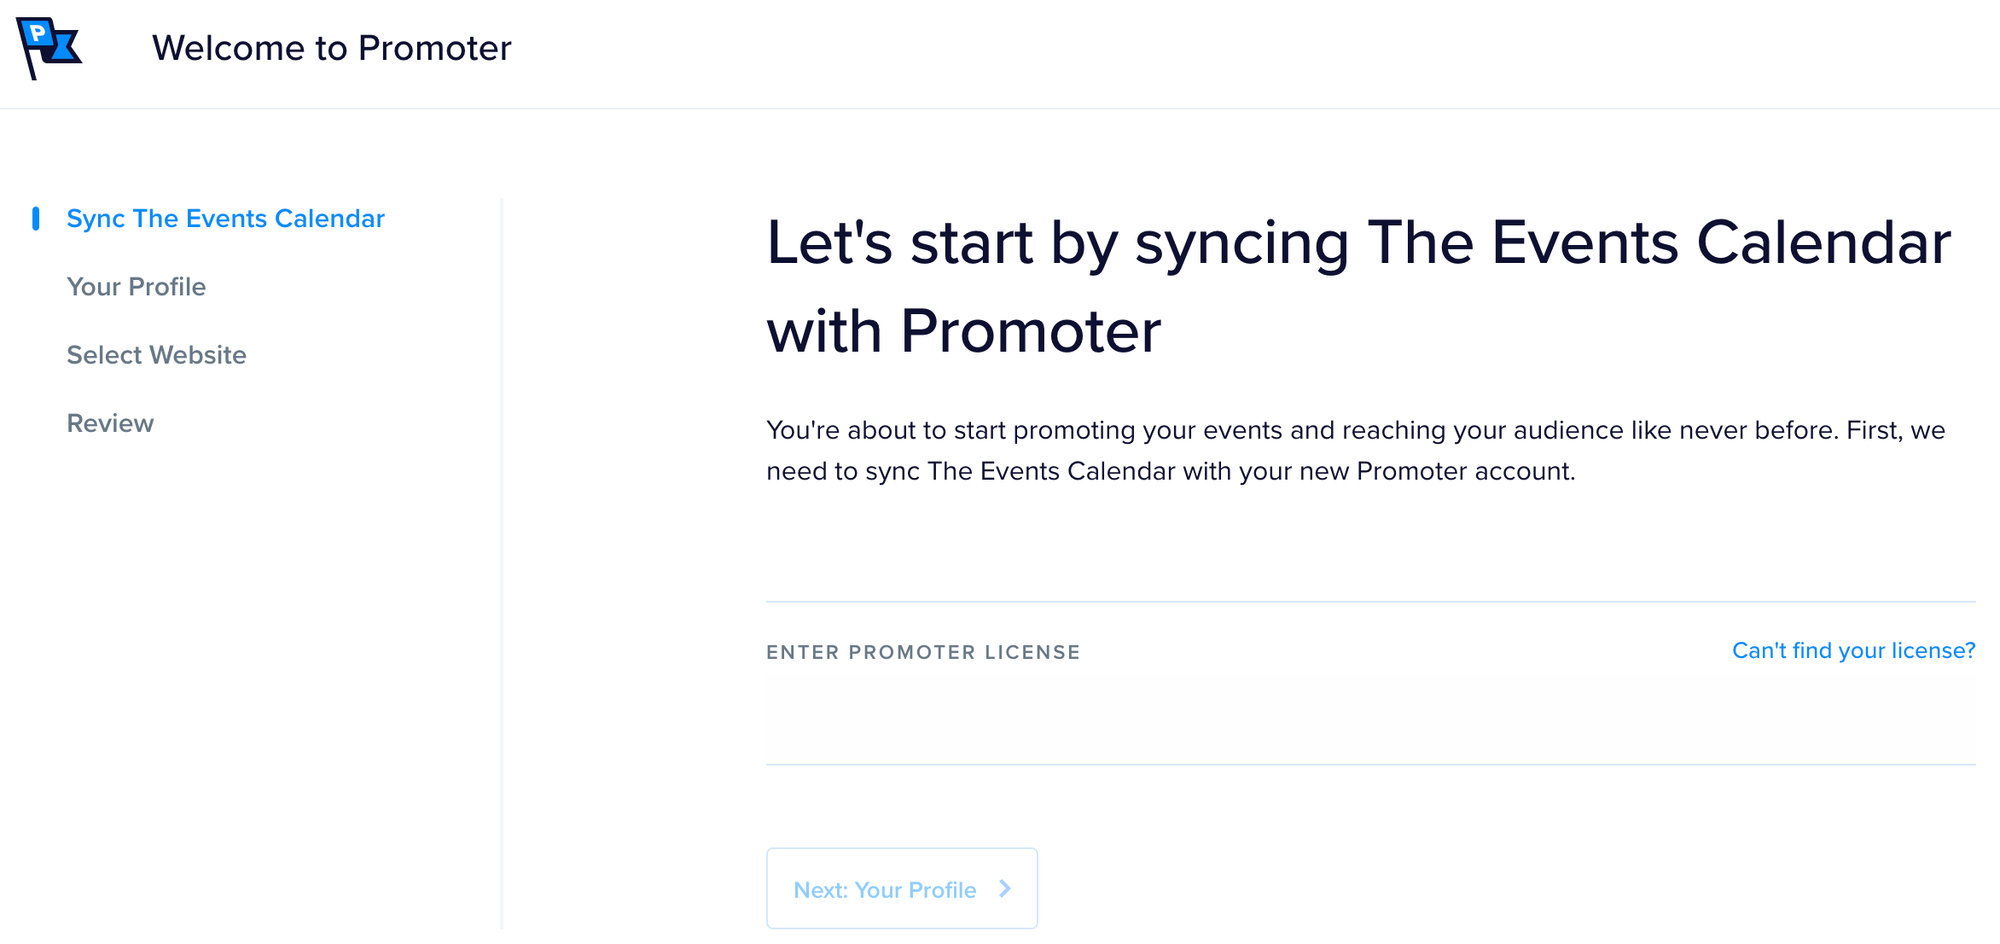 Promoter Quick Start Guide for custom email marketing